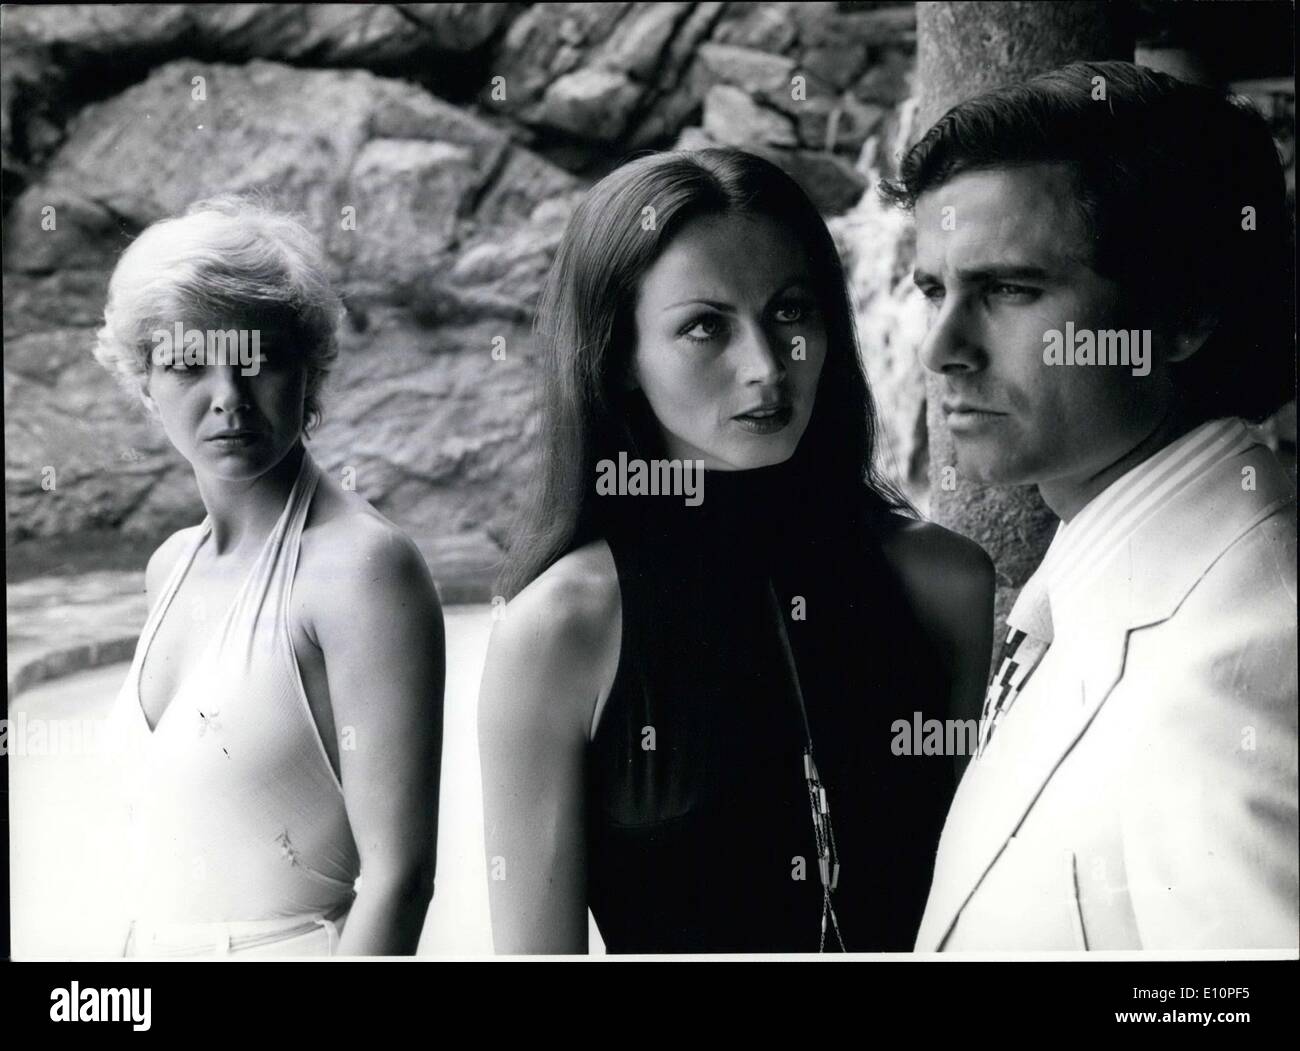 Sep. 11, 1973 - Gila von Weitershausen, Andrea Jonasson, and Nino Castelnuovo(pictured from left to right) star in the new film Stock Photo